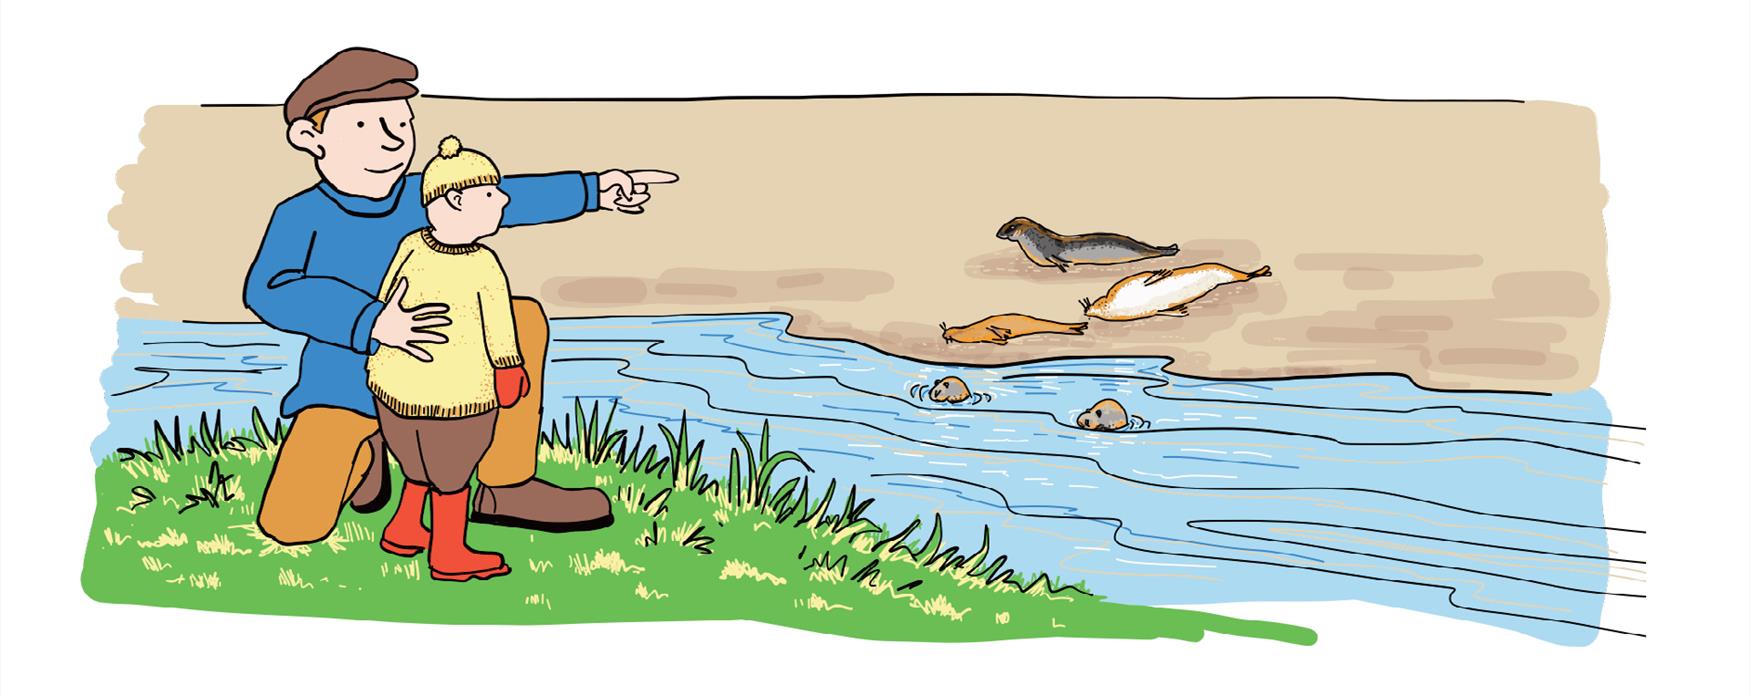 Illustration of Seal watching activity